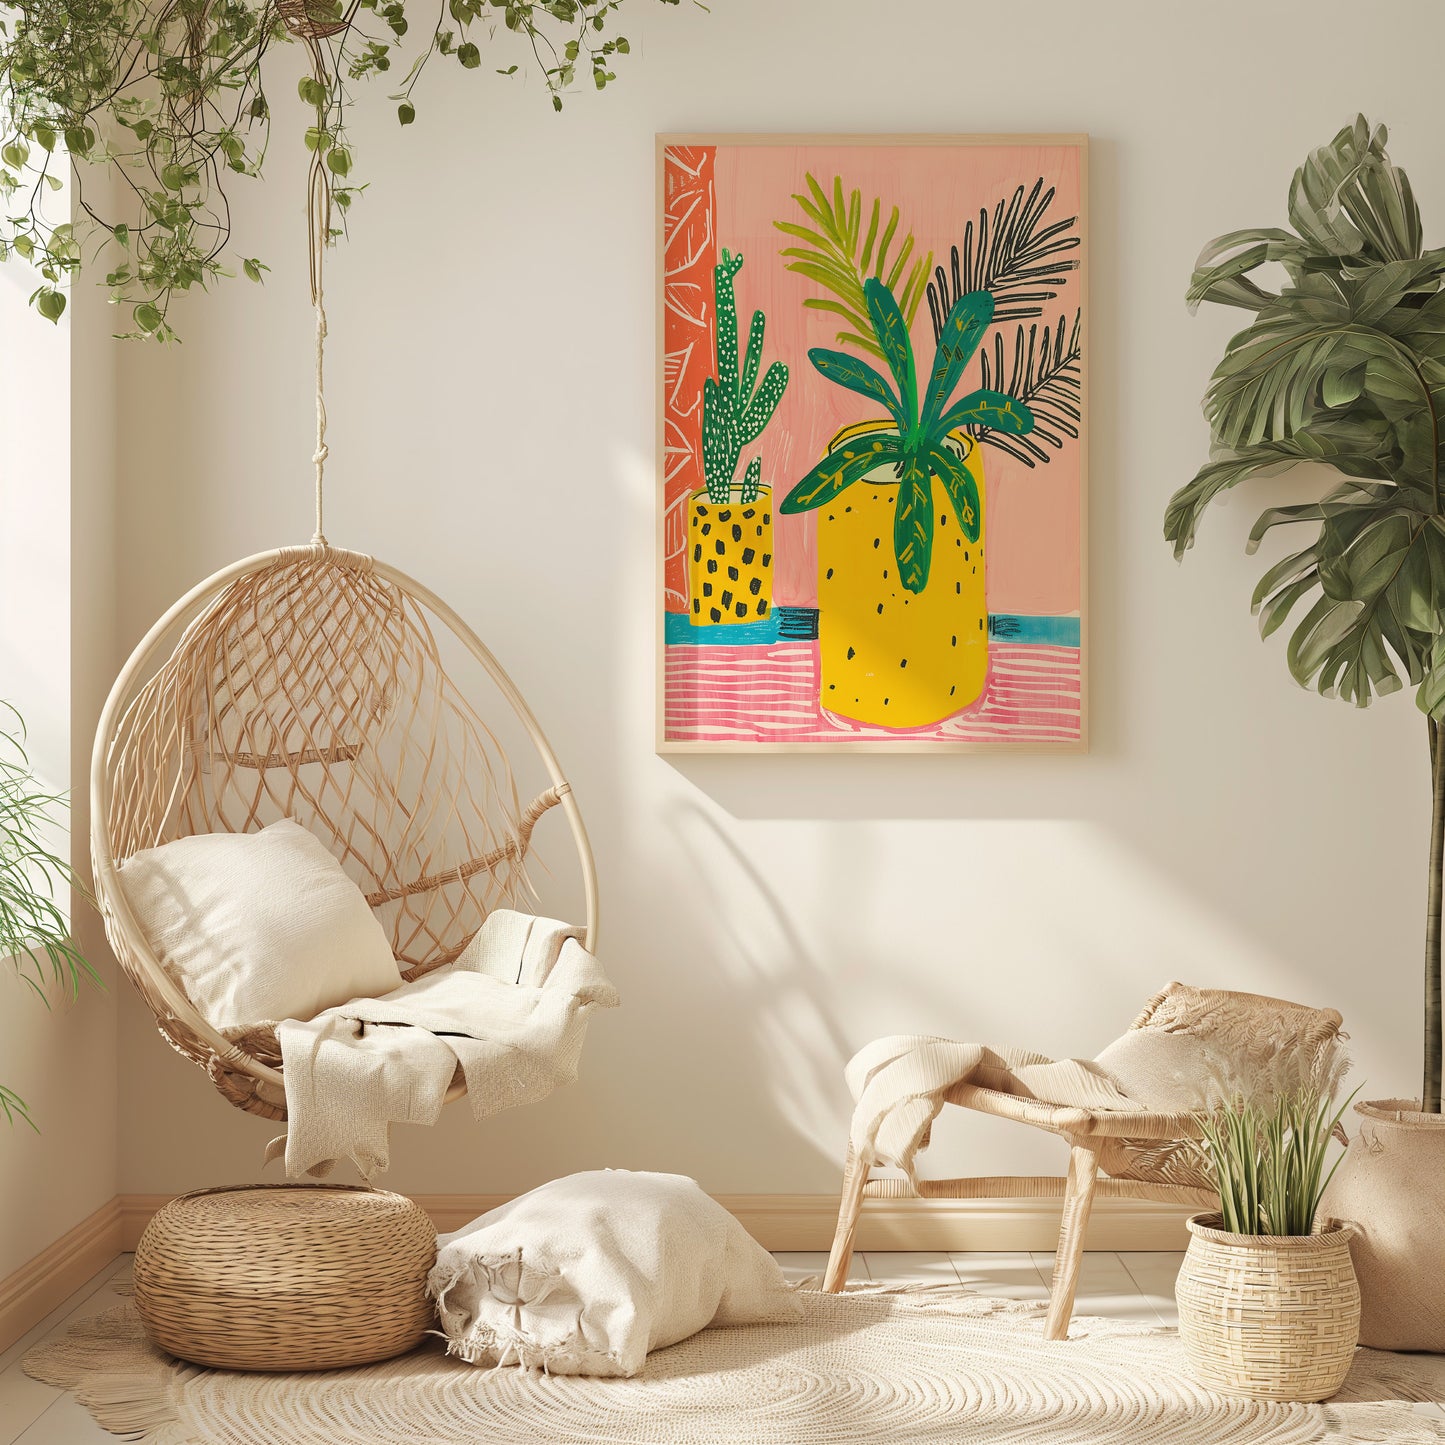 A cozy corner with a hanging wicker chair, tropical-themed wall art, and sunlit plants.